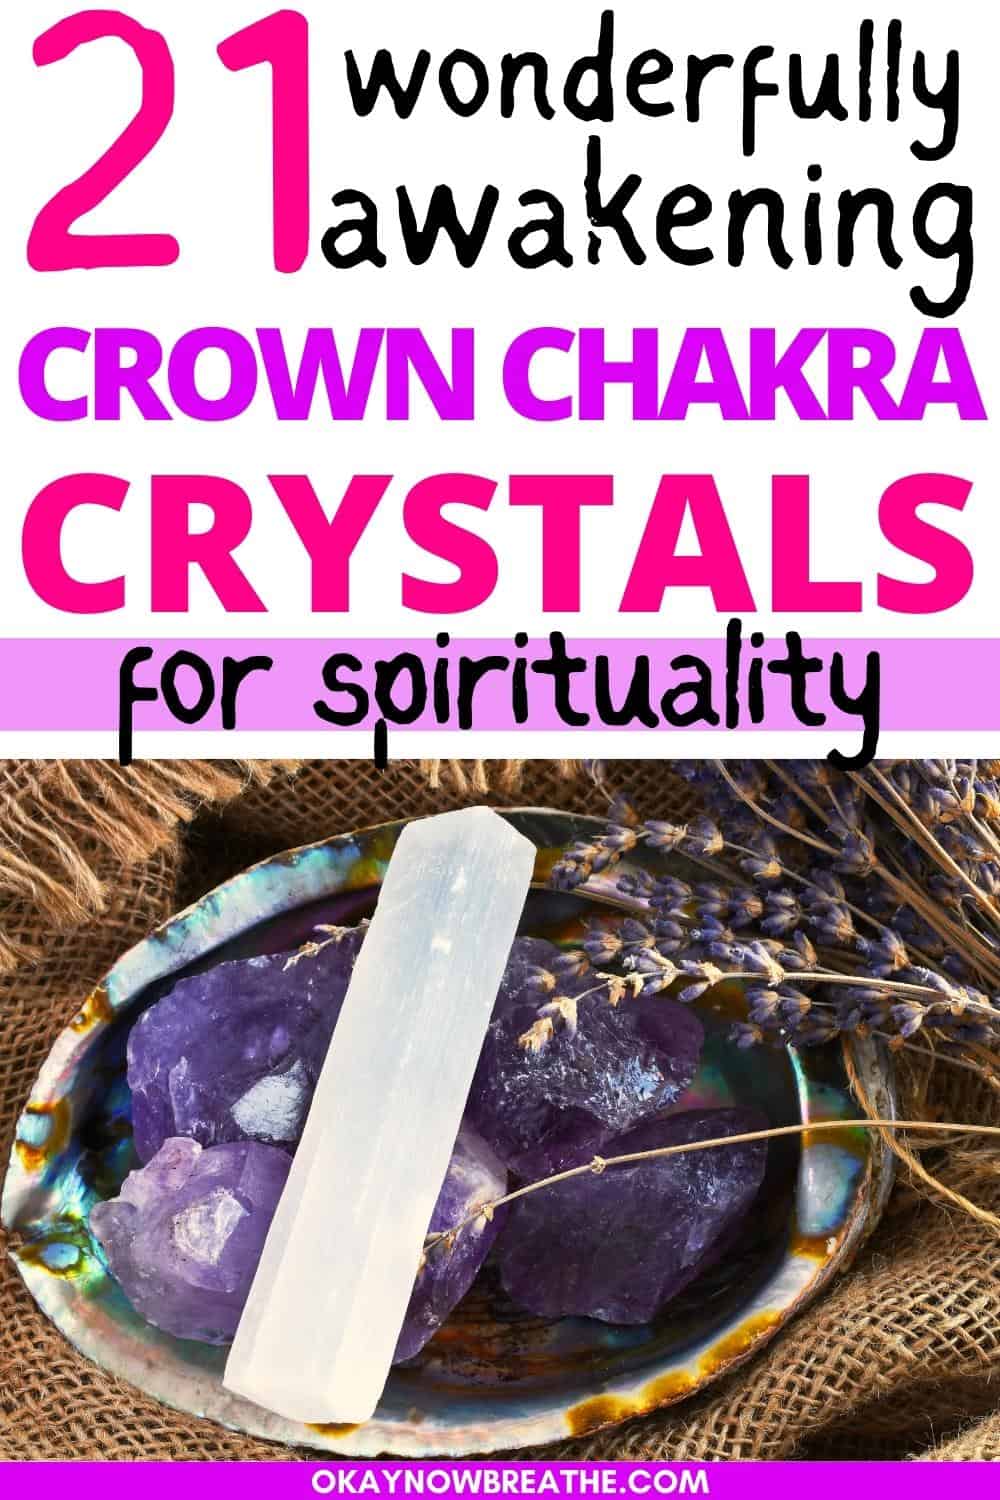 In a small bowl there are amethyst crystals with a piece of selenite on top. Above this image, there is text that says: 21 wonderfully awakening crown chakra crystals for spirituality - okaynowbreathe.com